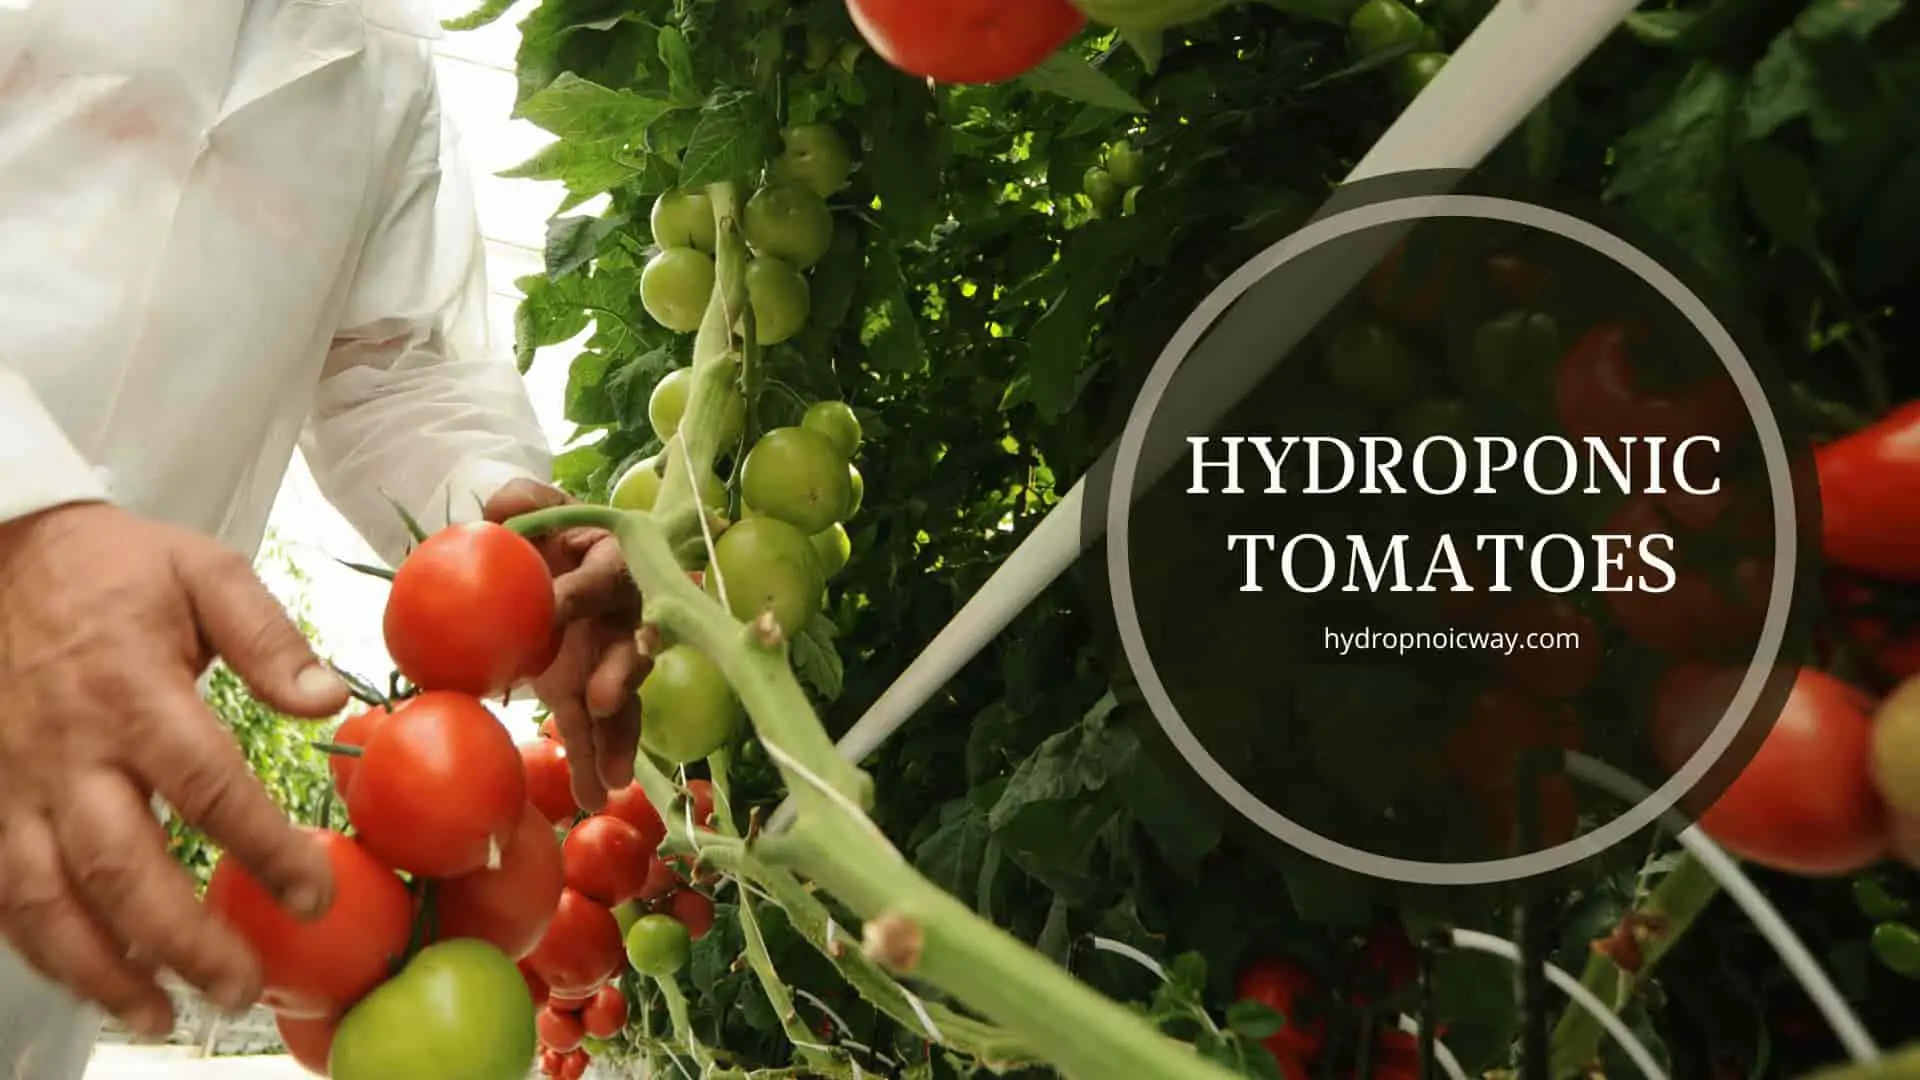 % Tomatoes don't need pollination. But it's good practice. You can try these tips instead to improve hydroponic tomato yield.